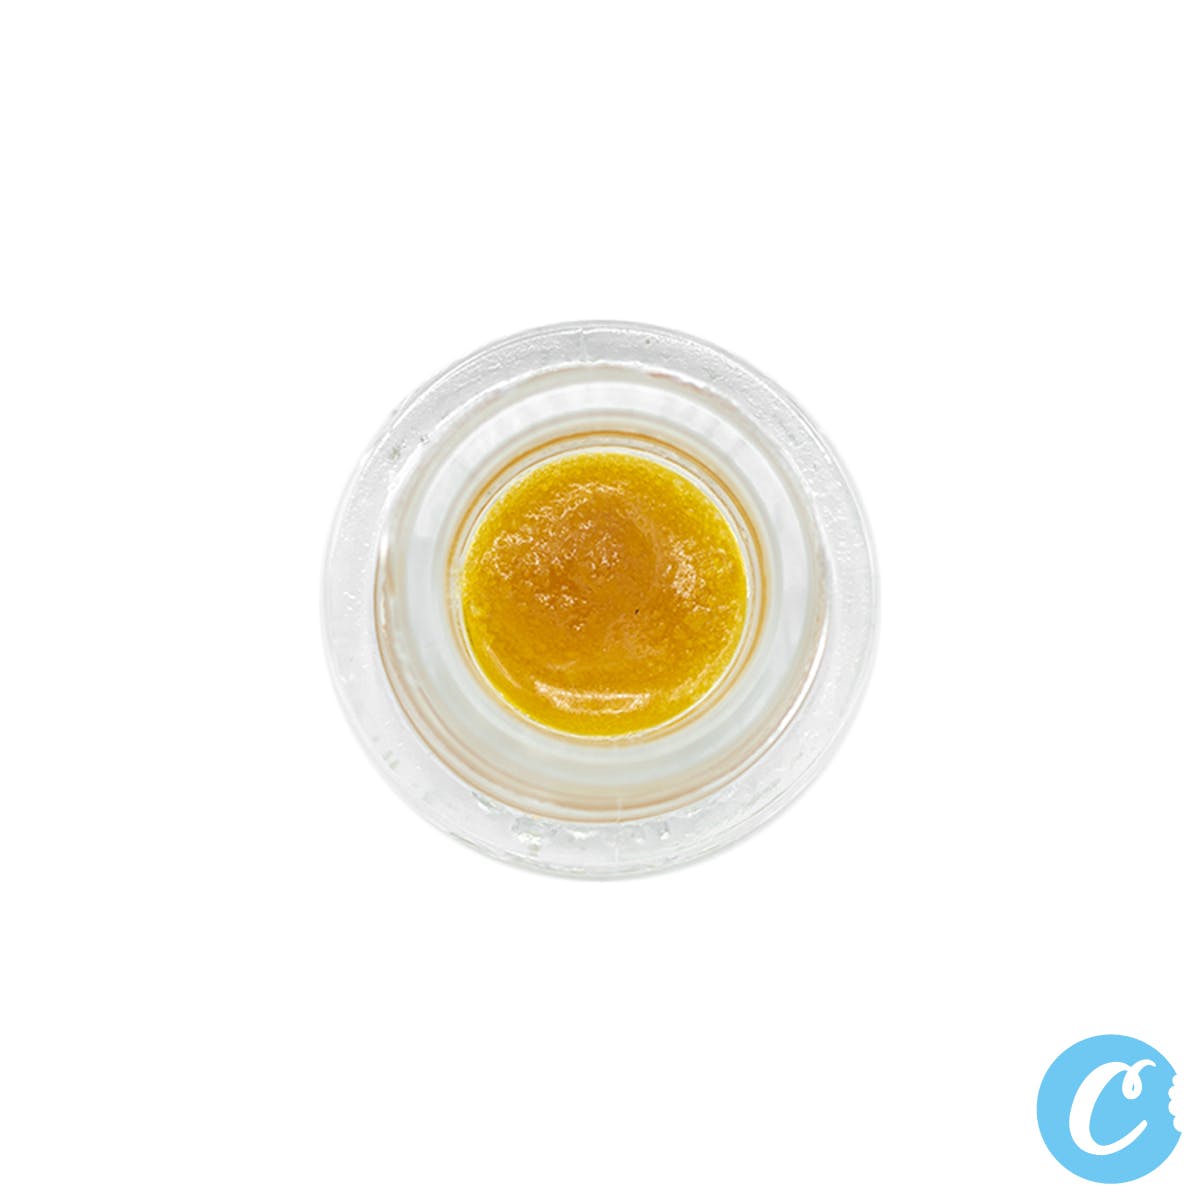 FIELD EXTRACTS SAUCE - Sour Zmoothie